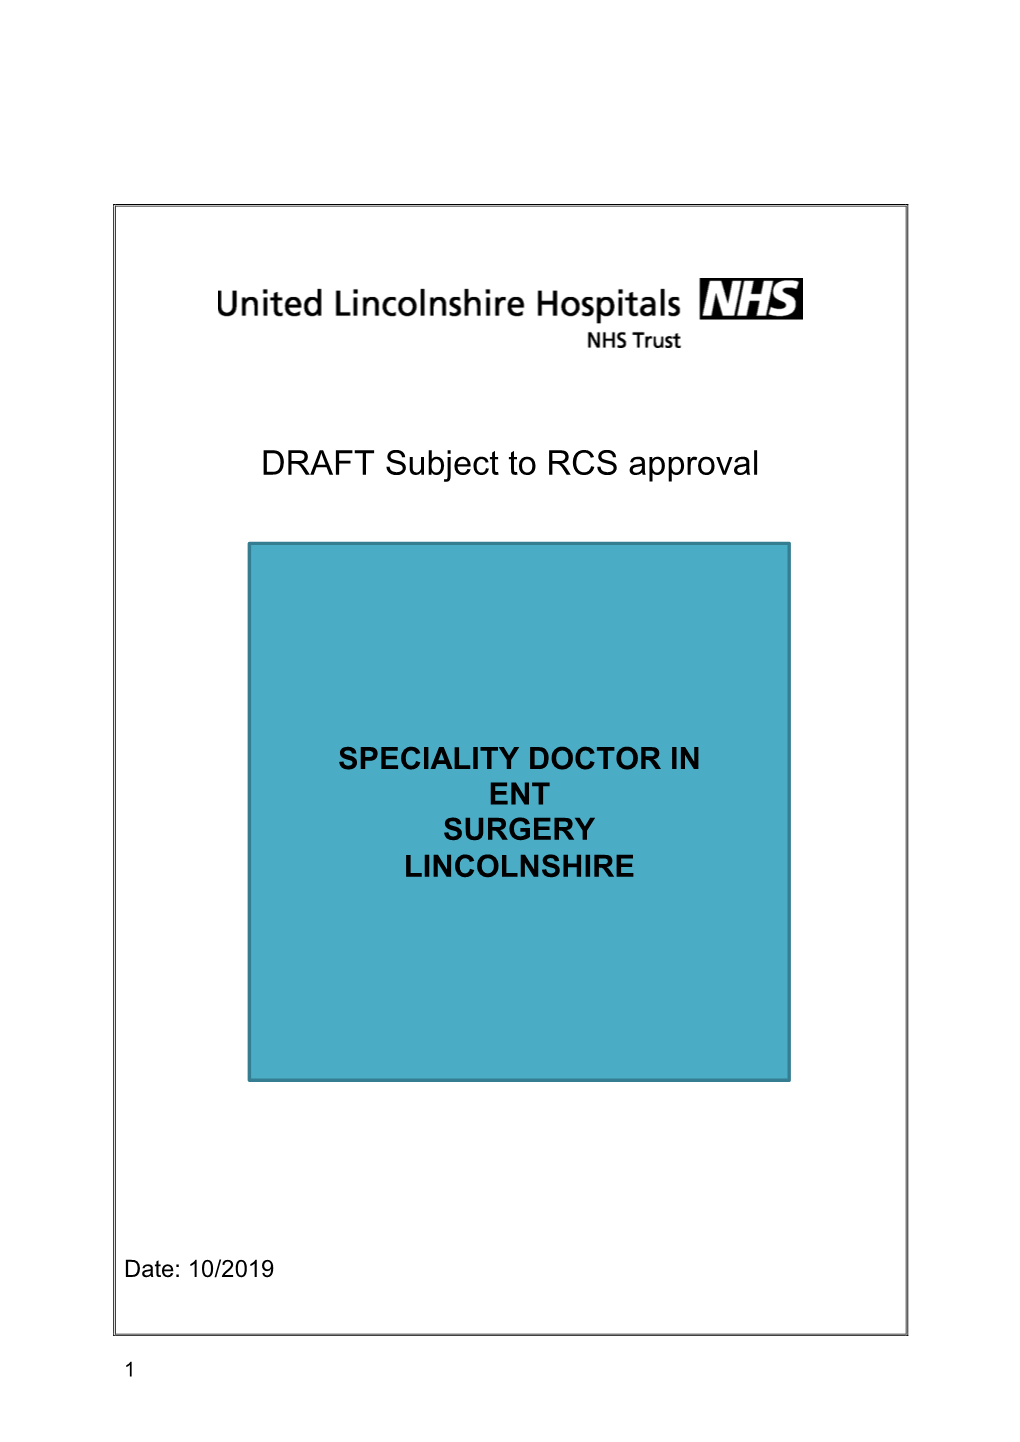 United Lincolnshire Hospitals NHS Trust Brought Together Lincoln and Louth NHS Trust, Pilgrim Hospital NHS Trust and Grantham and District Hospital NHS Trust